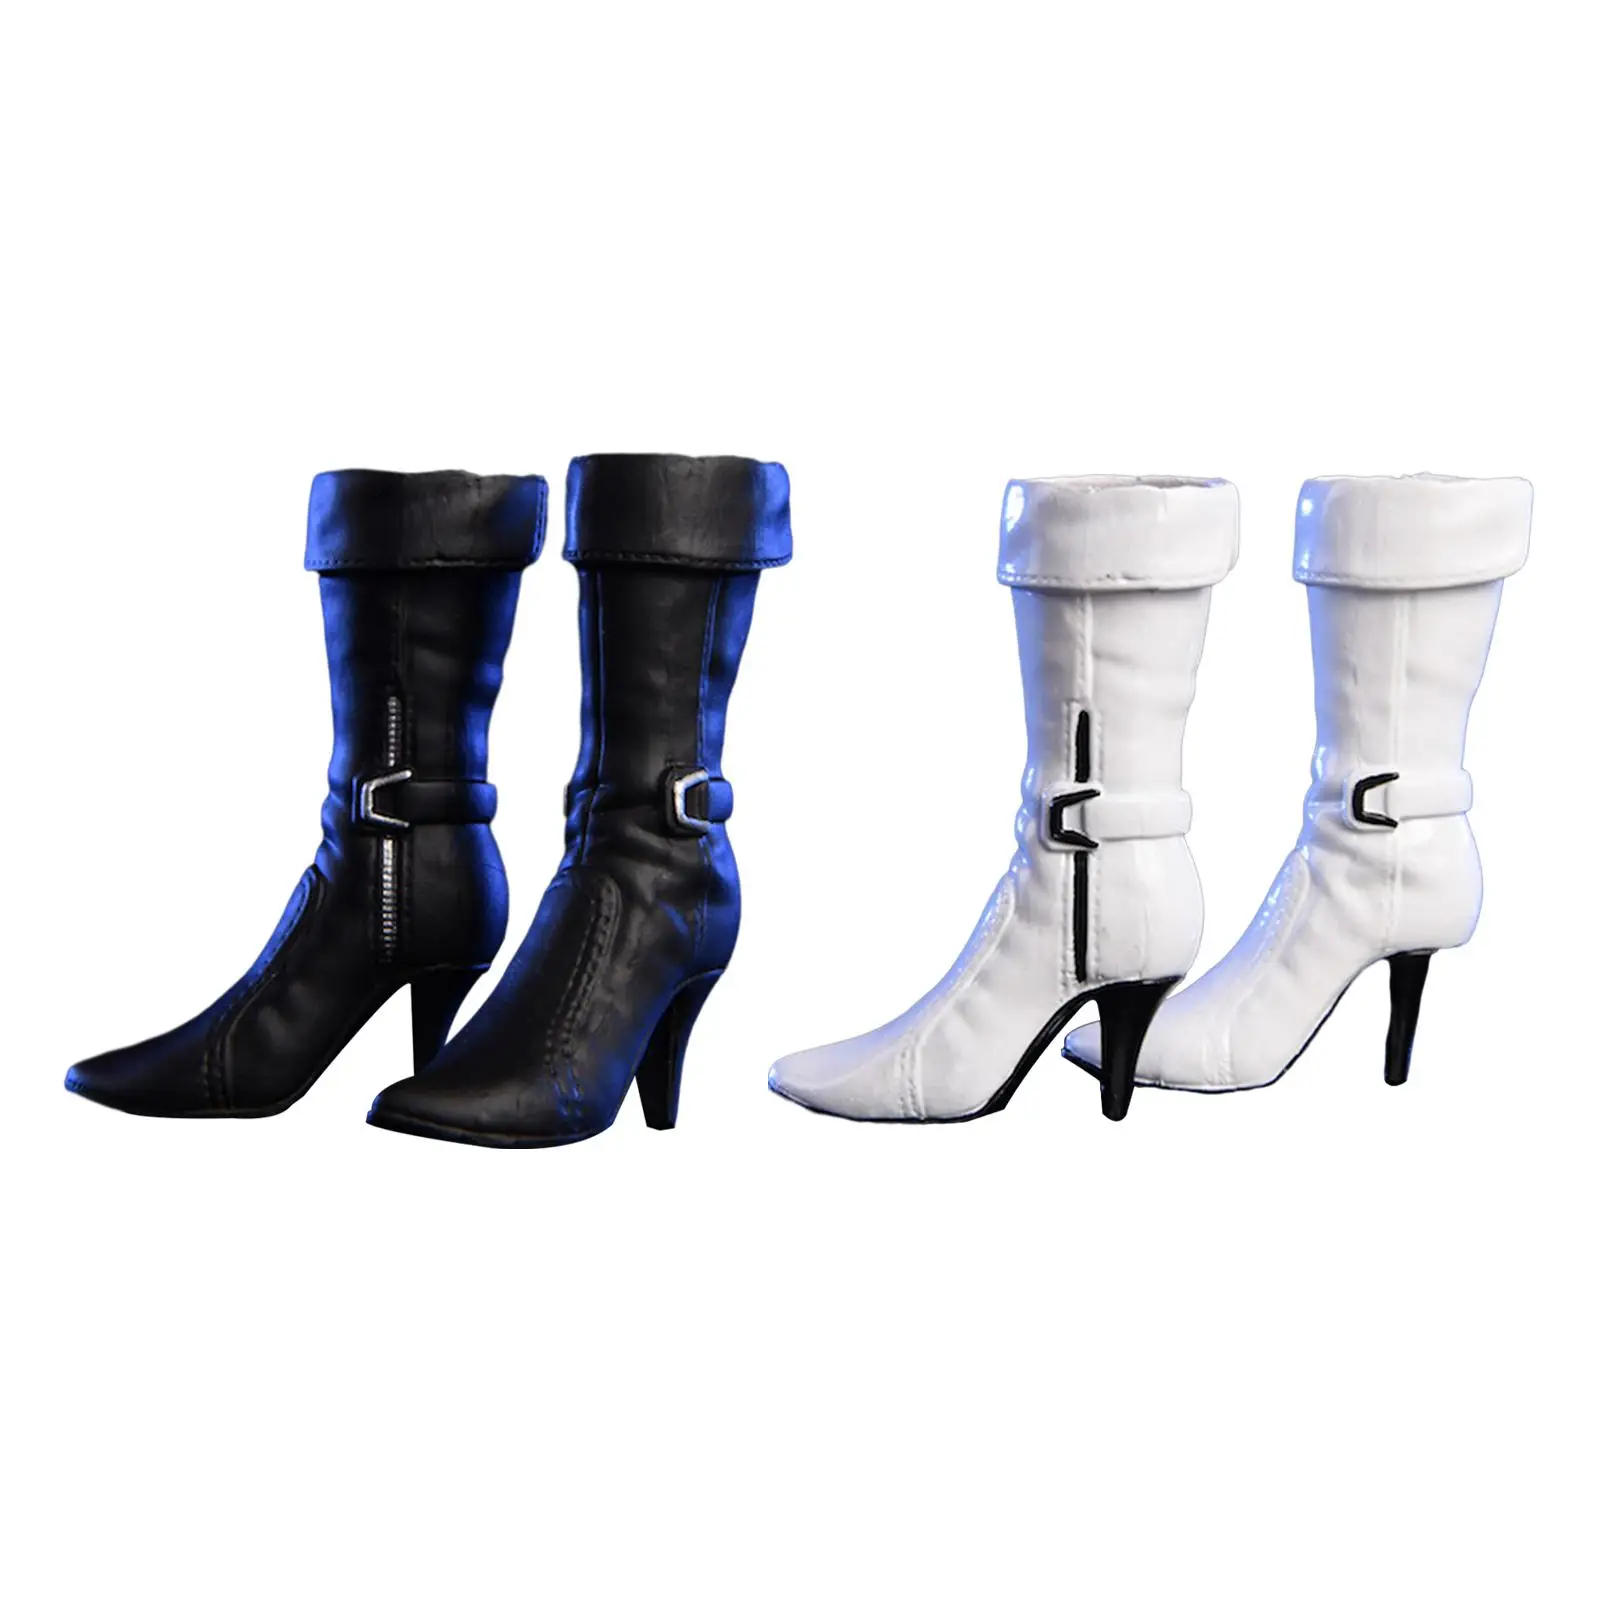 1/6 Scale Figure Shoes PU Leather Outfits Girl Doll Shoes Fashion Boots High Heeled Shoes for 12 inch Action Figure Accessories